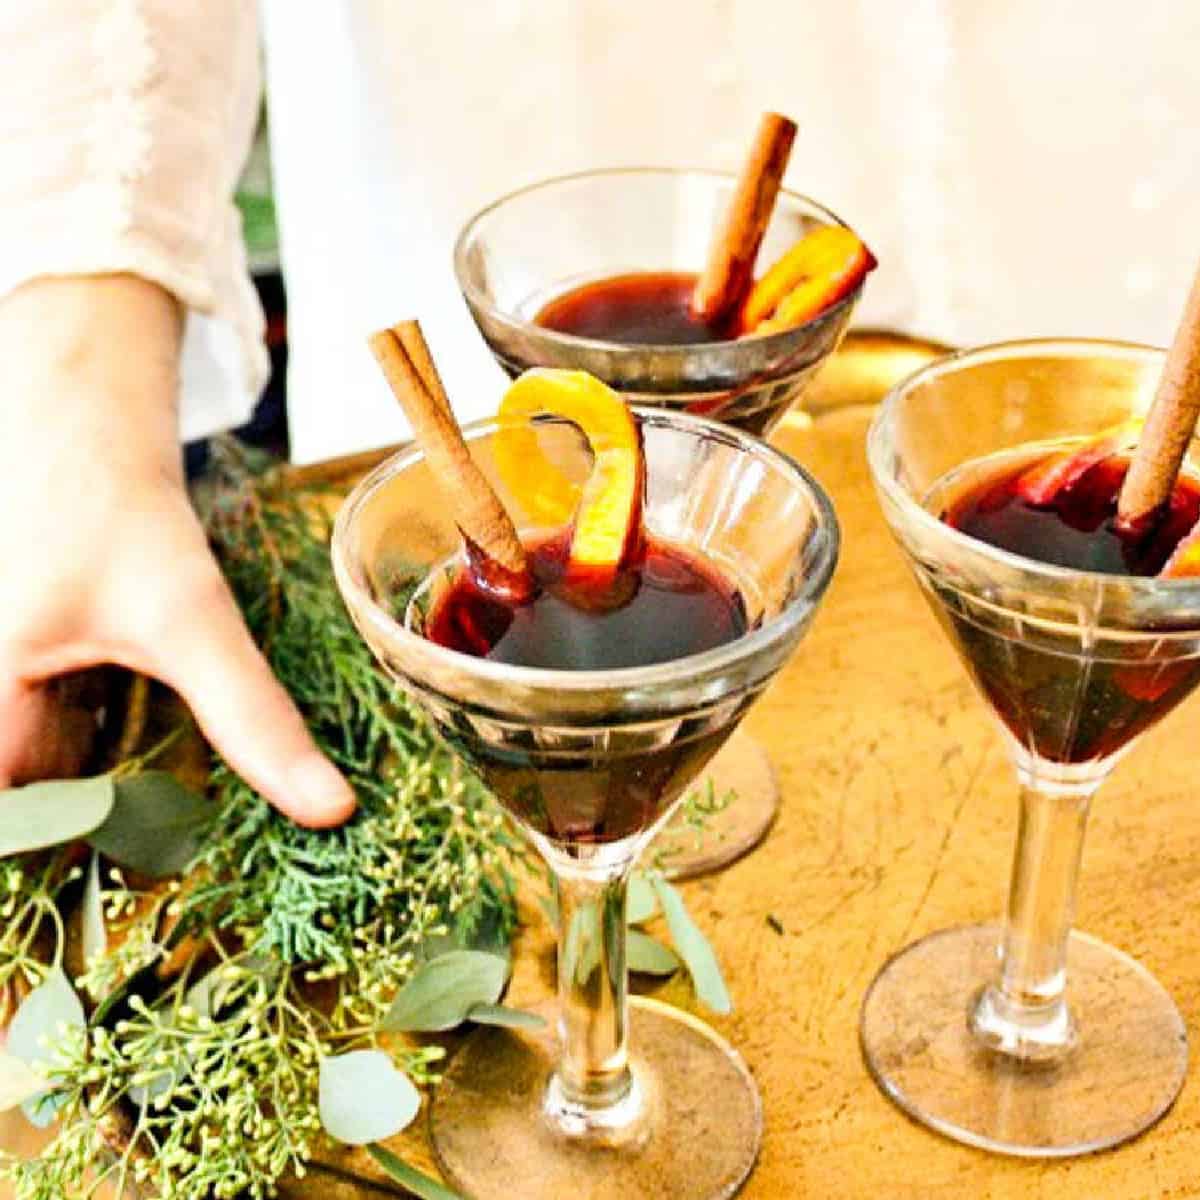 https://www.delicioustable.com/wp-content/uploads/2020/12/Mulled-Wine-featured.jpg